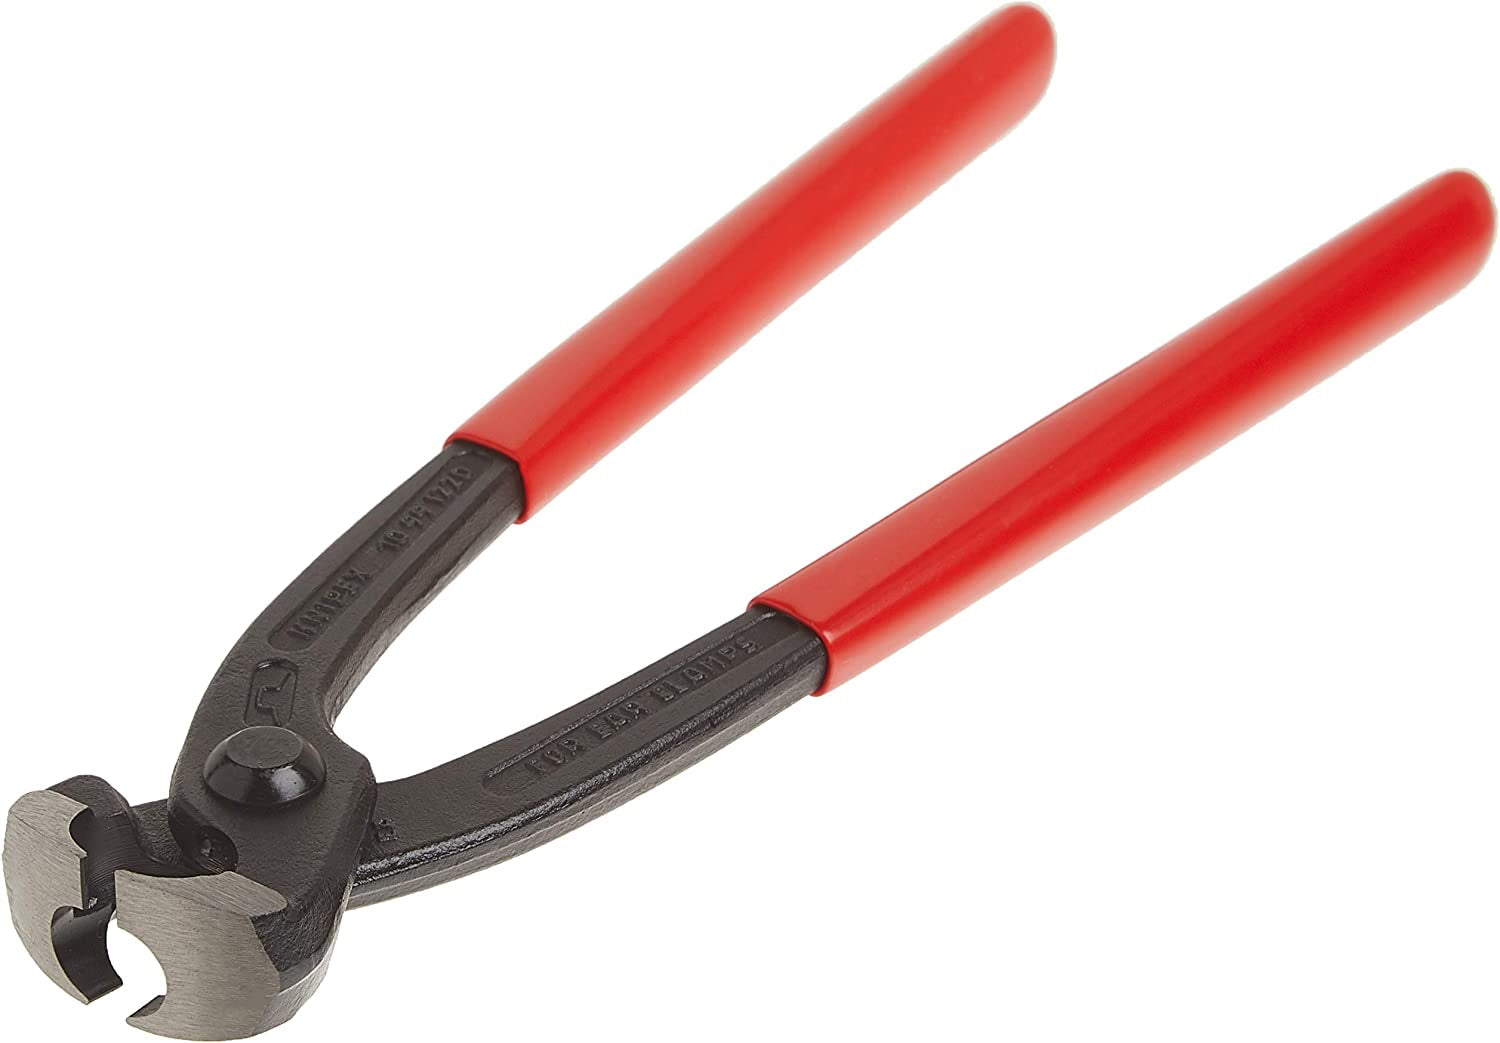 KNIPEX Tools, Knipex Tools 10 99 I220 8.75" Ear Clamp Pliers